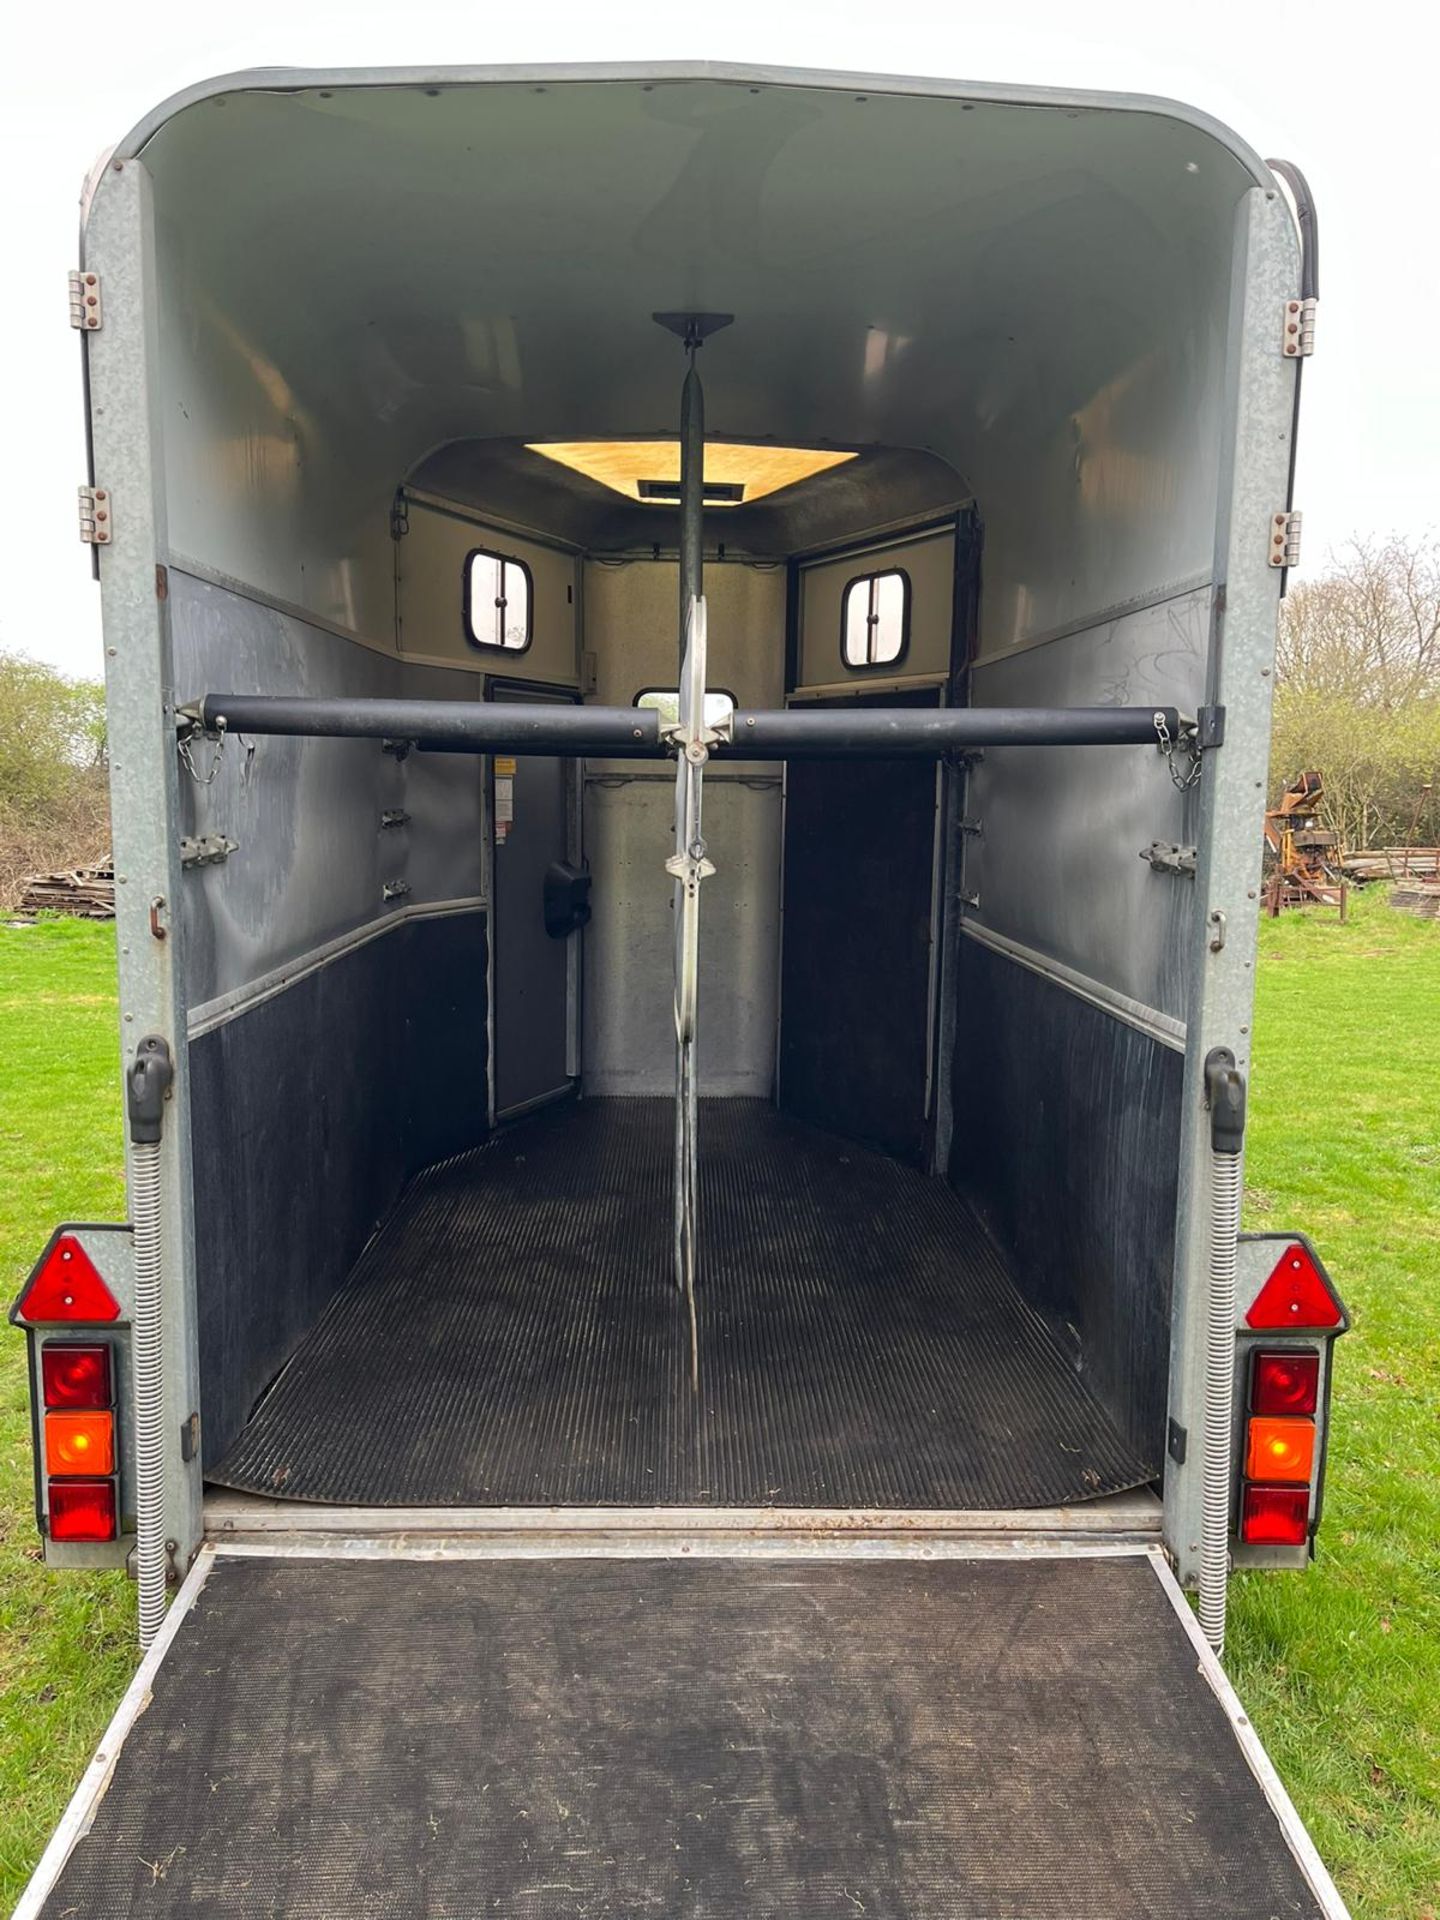 IFOR WILLIAMS HB 505 Classic 2 Horse Trailer, manufactured by Ifor Williams in 2006 - Image 4 of 5